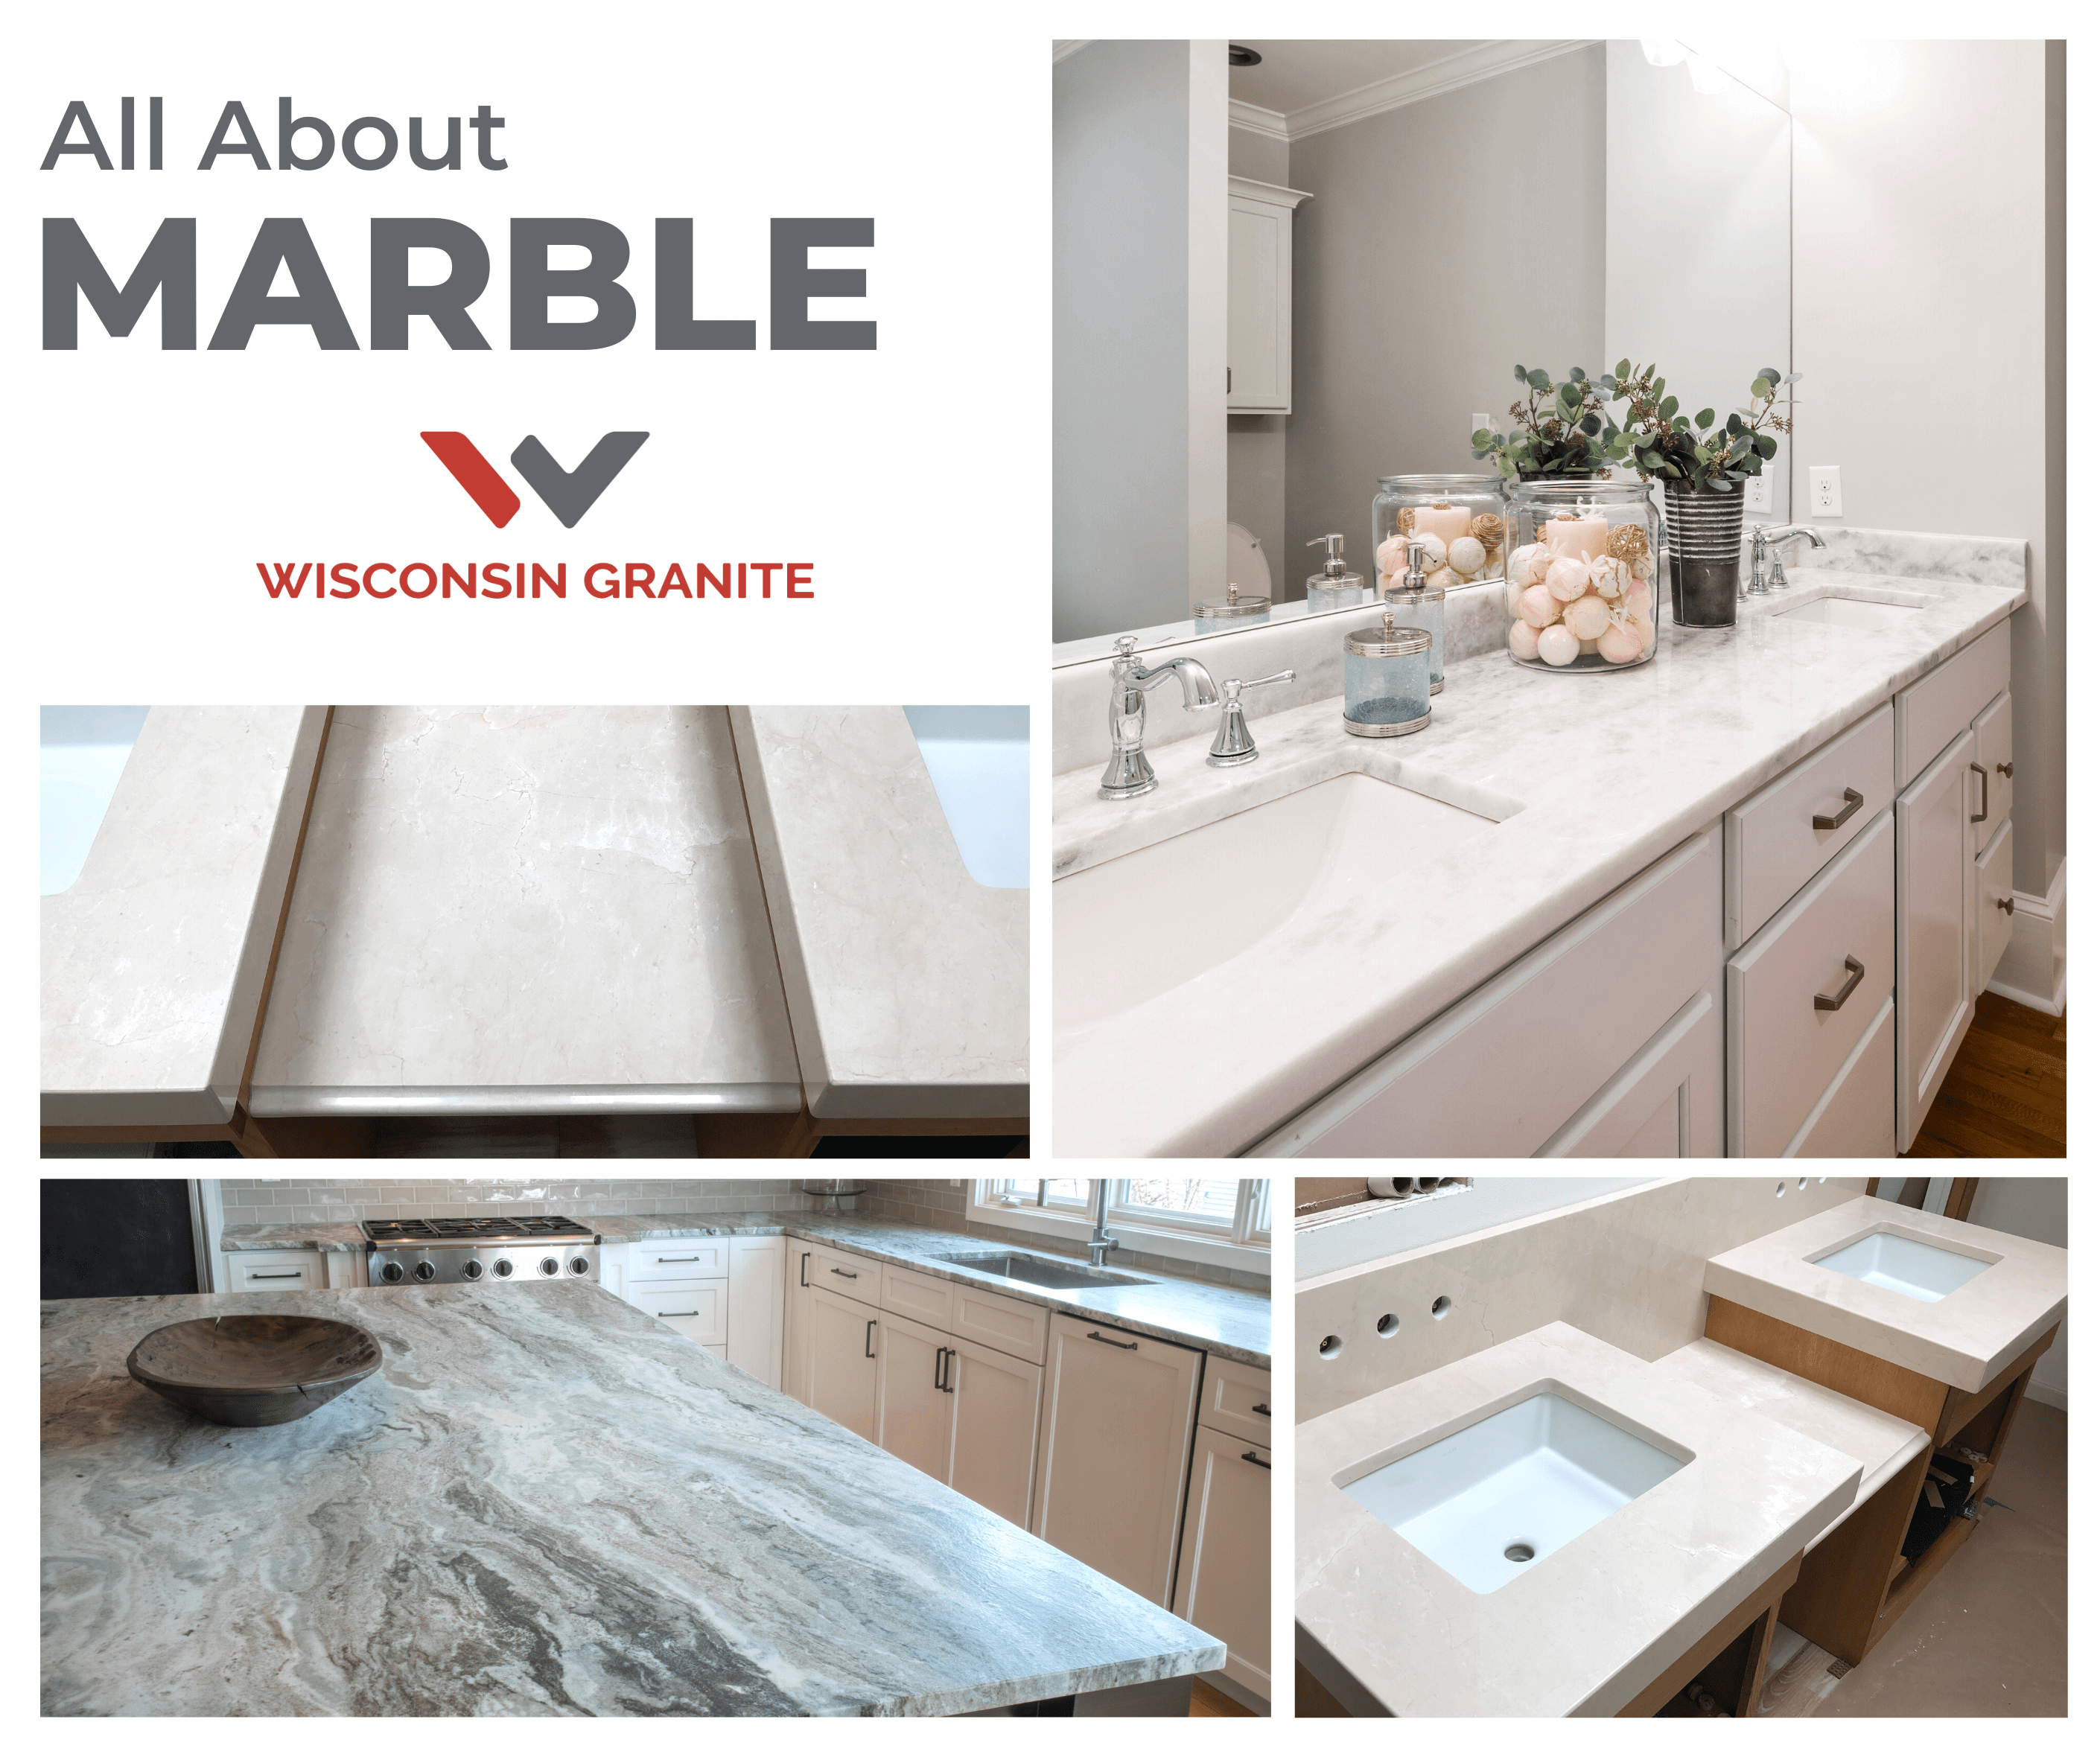 All About Marble